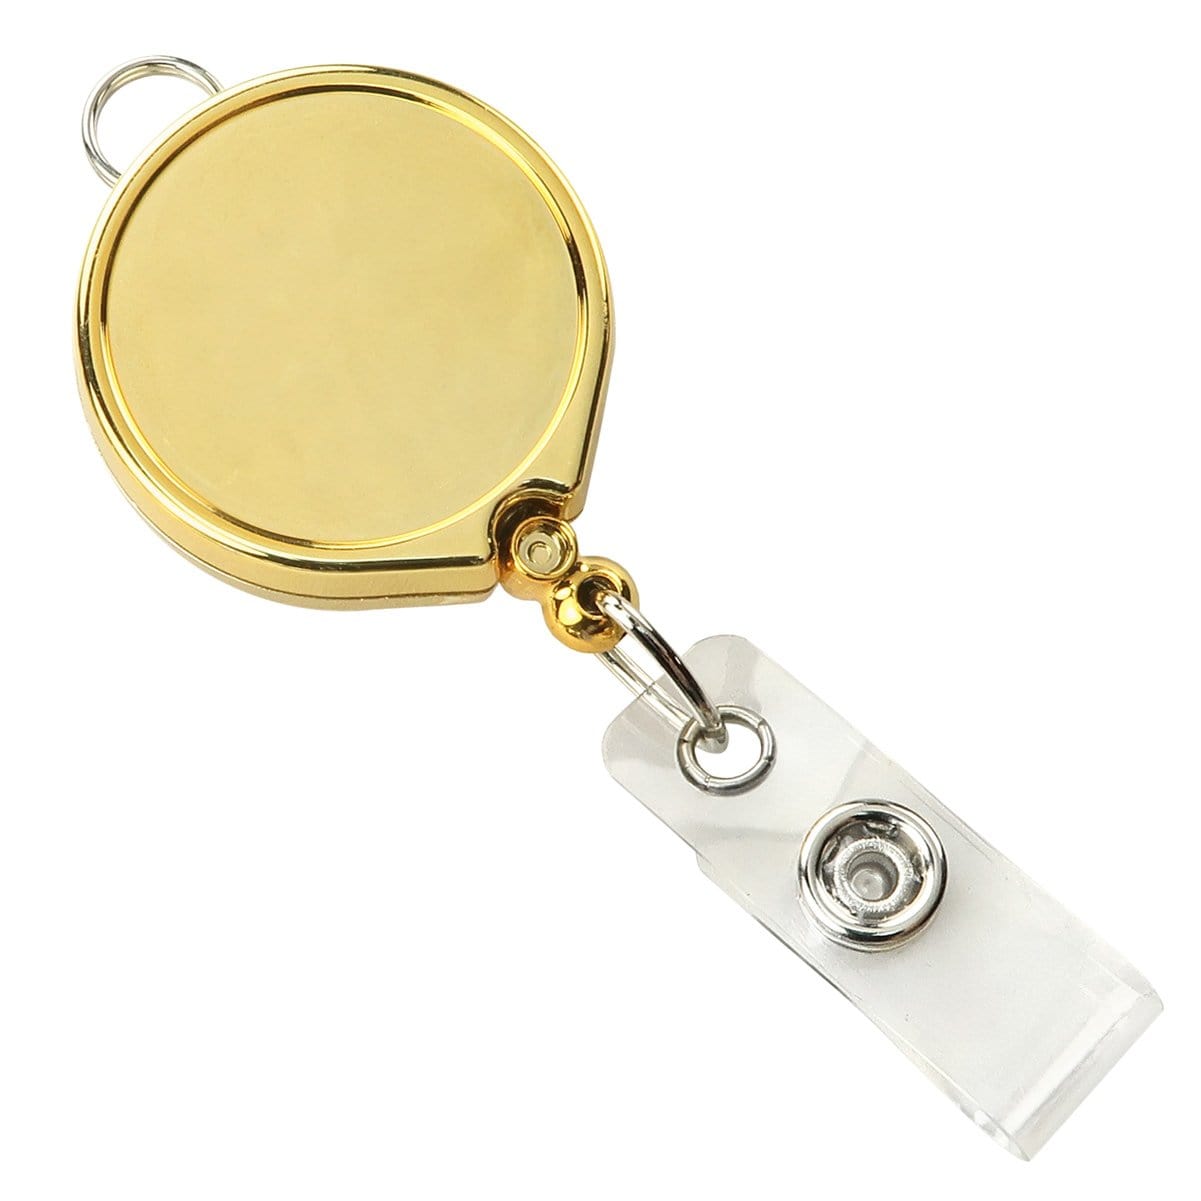 Gold Badge Reel with Lanyard Attachment and Belt Clip (P/N 2124-302X) 2124-3029